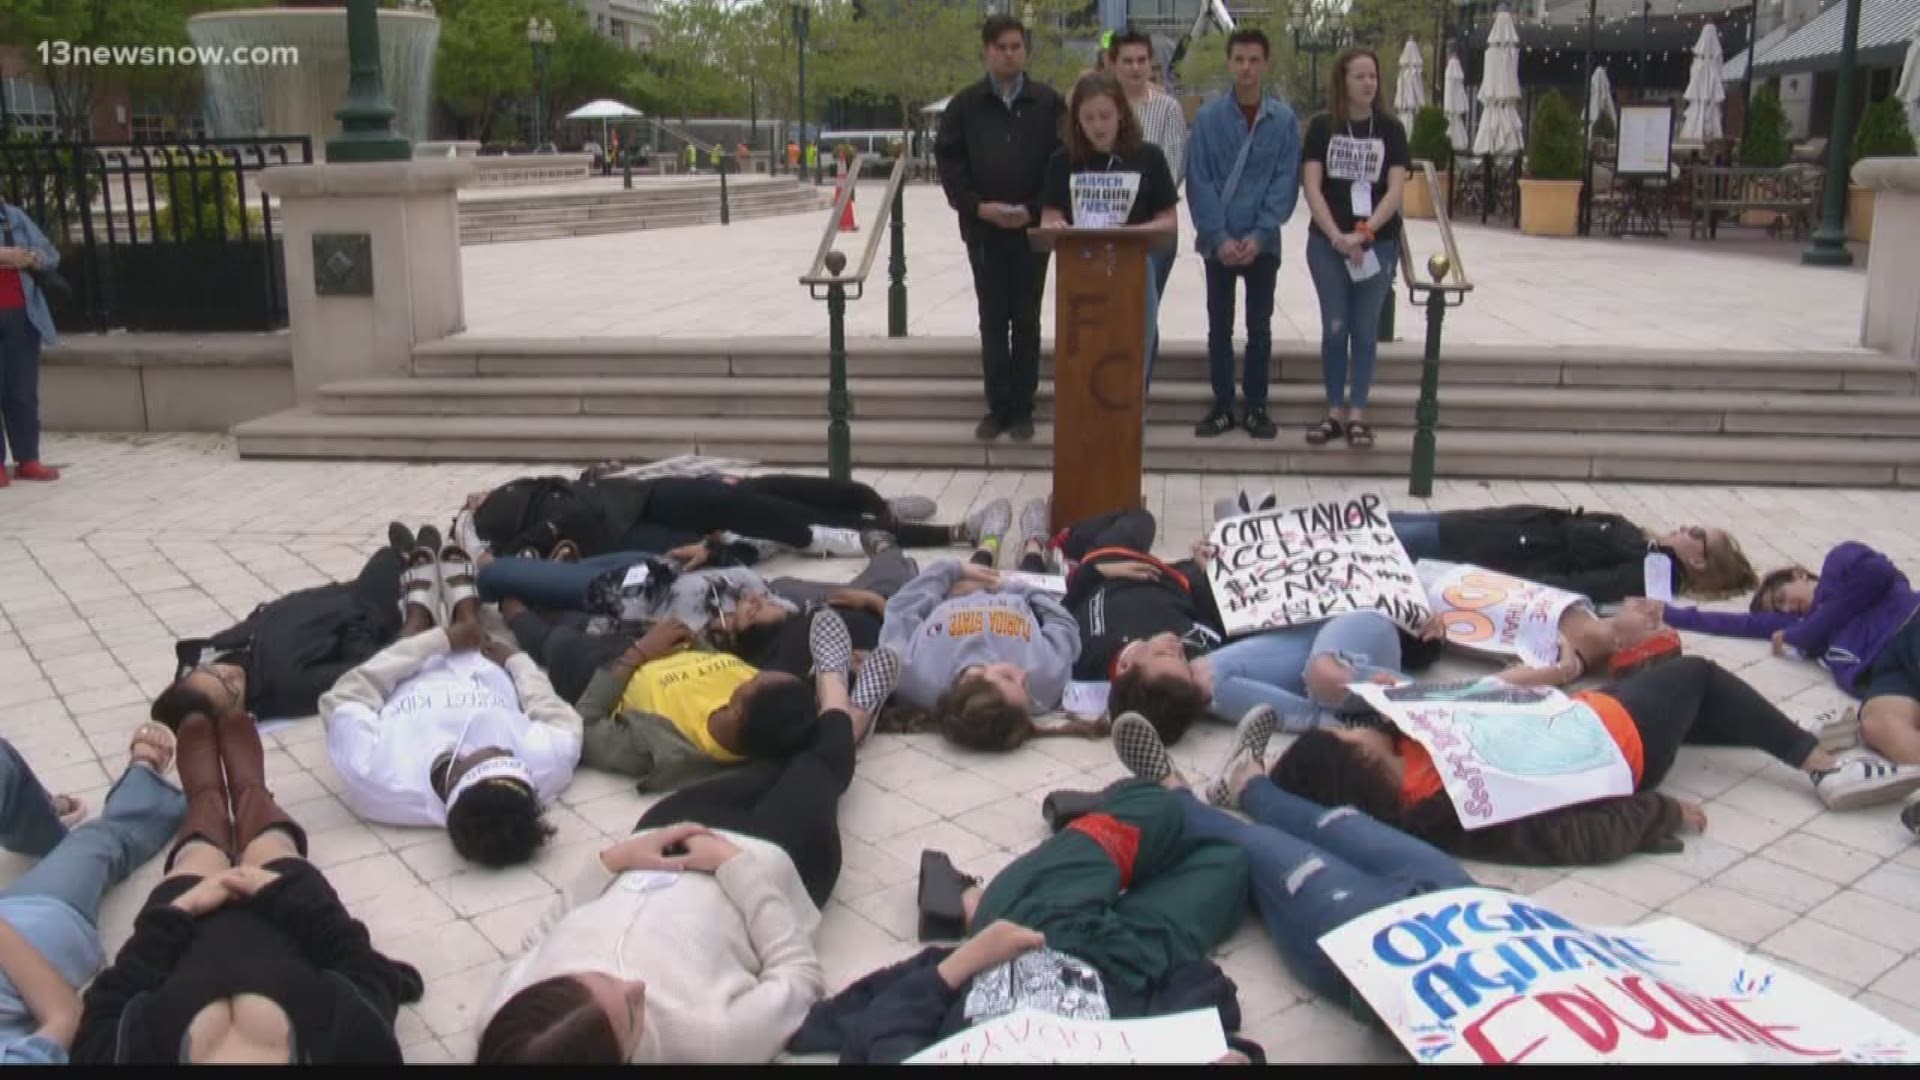 Dozens of students gathered to stage a "die-in" protest at the Virginia Beach Town Center to fight for stricter gun control laws.